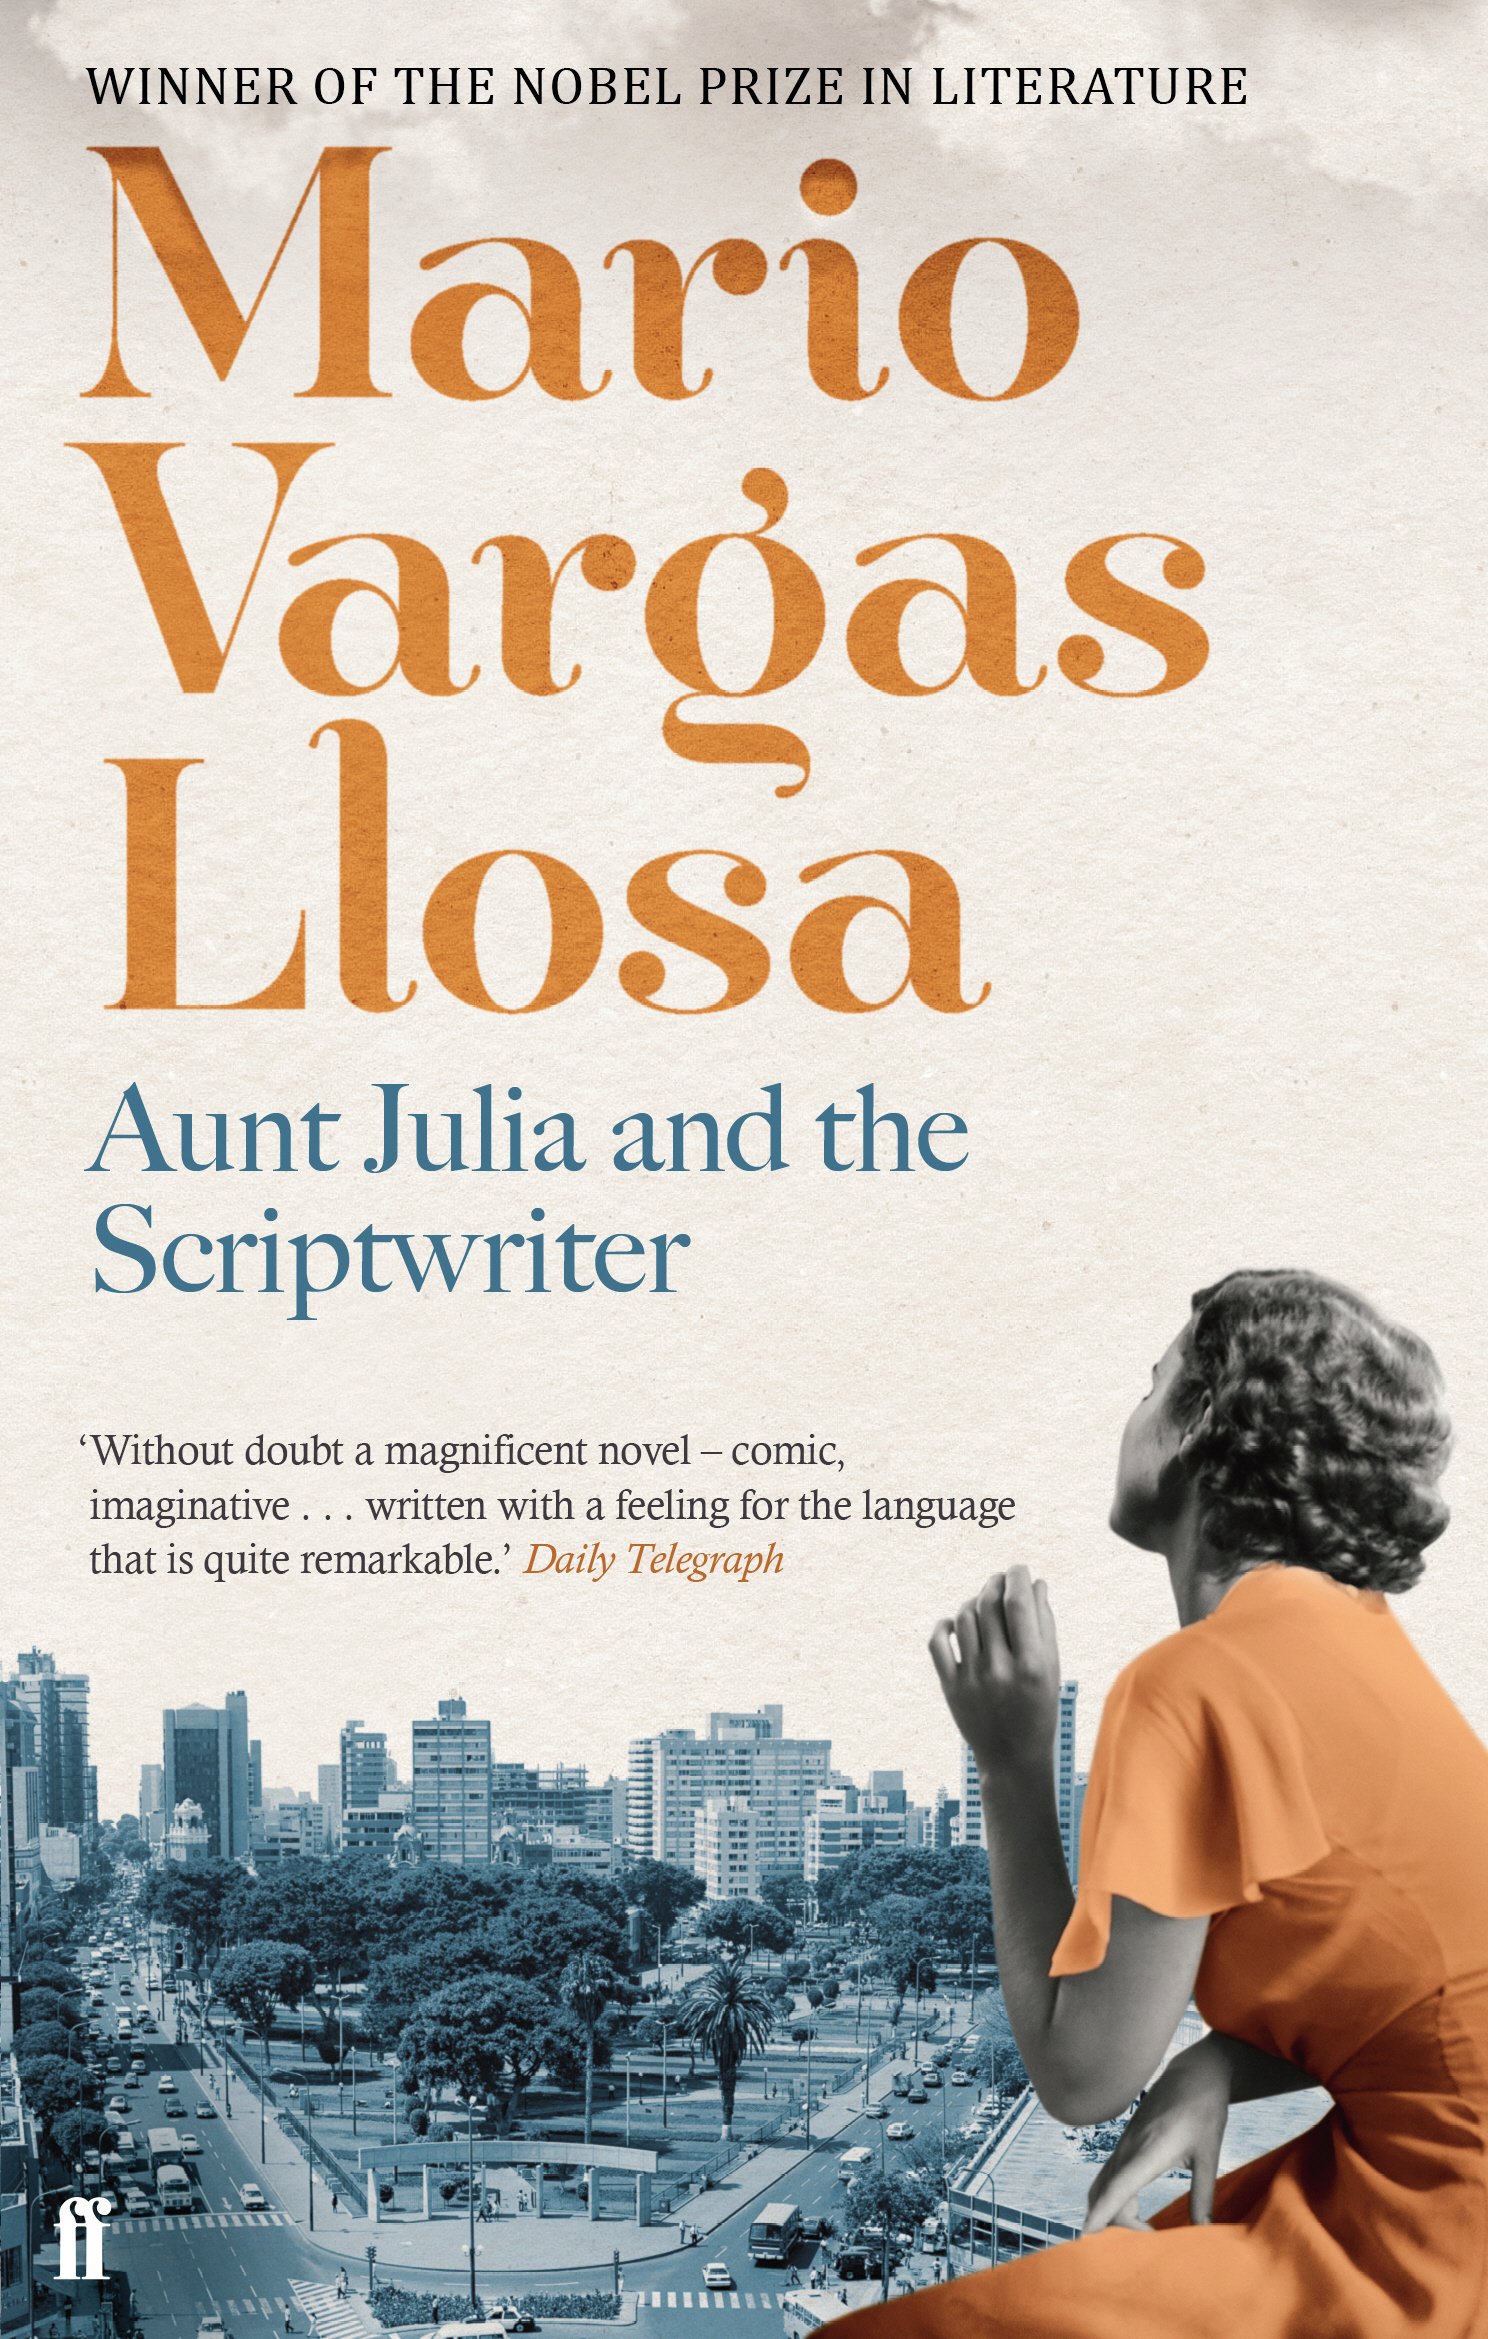 and　Julia　Llosa　Scriptwriter　Vargas　by　Mario　the　Aunt　Faber